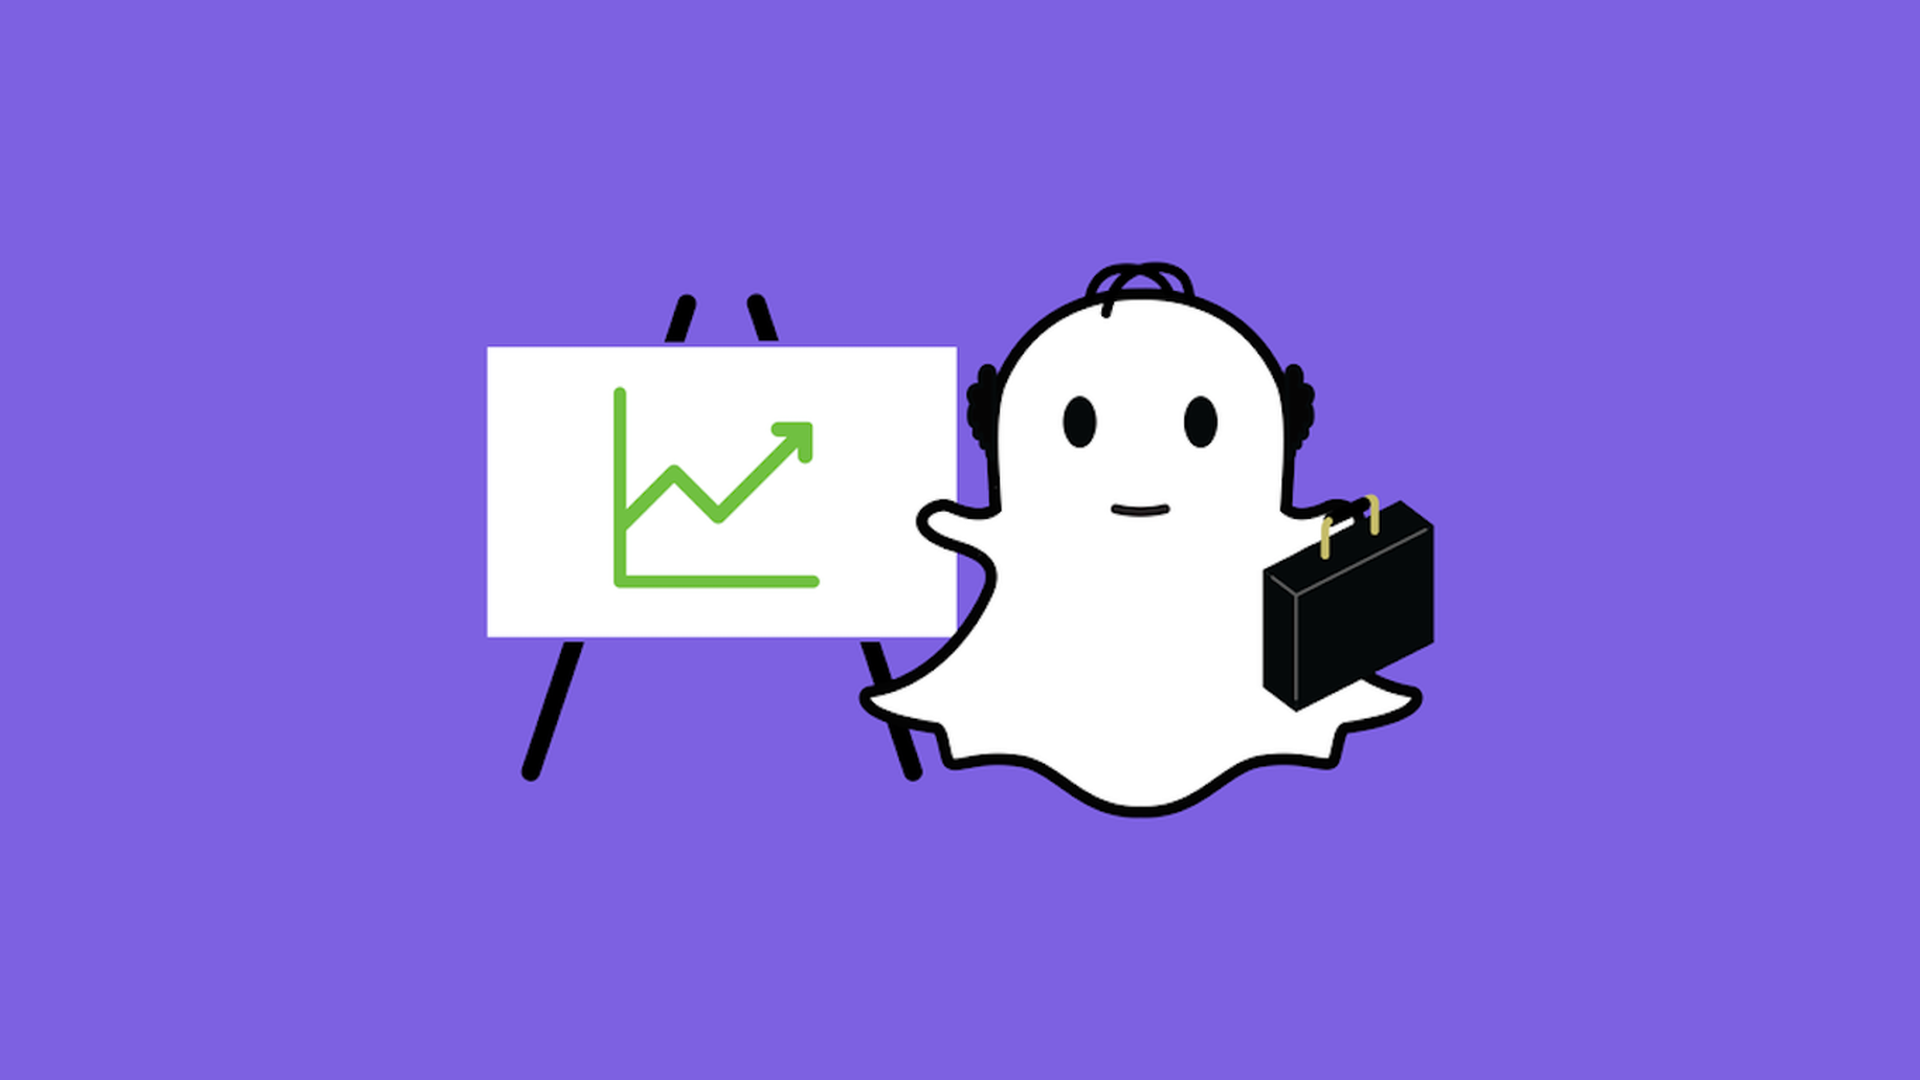 Snapchat's logo next to a projection chart.